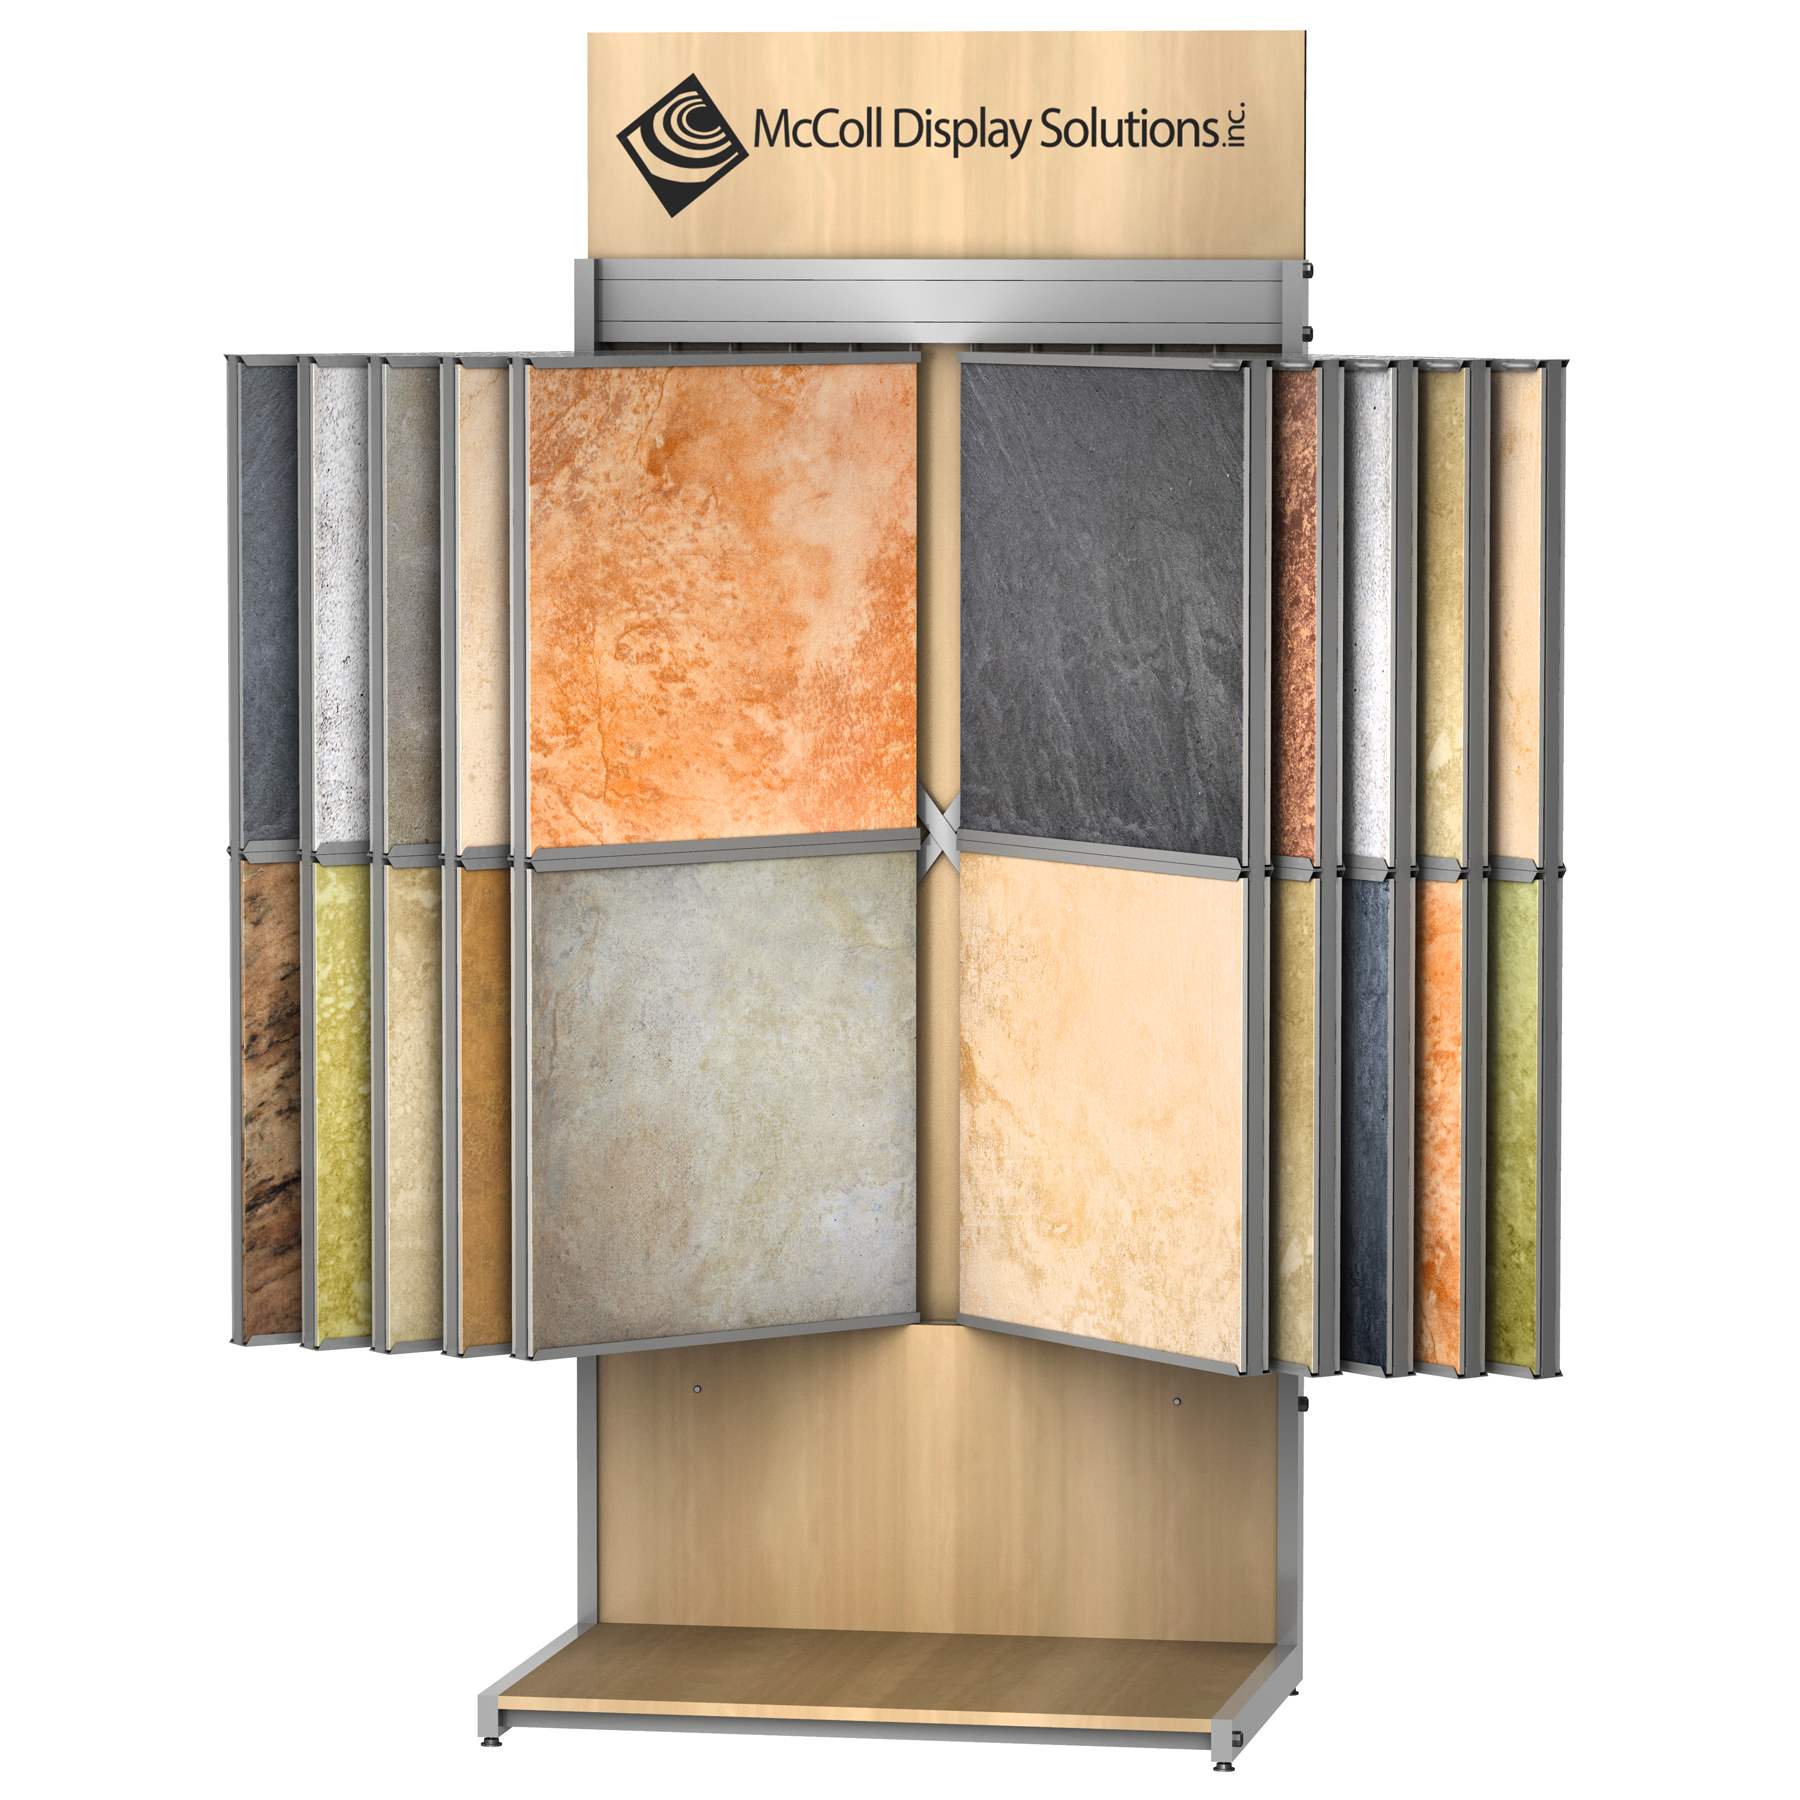 Easily Customized to Your Needs CD09 Wing Rack Tower for Loose Tile Samples such as Ceramic Porcelain Stone Marble Travertine Composite Flooring great Channel System Showroom Displays McColl Display